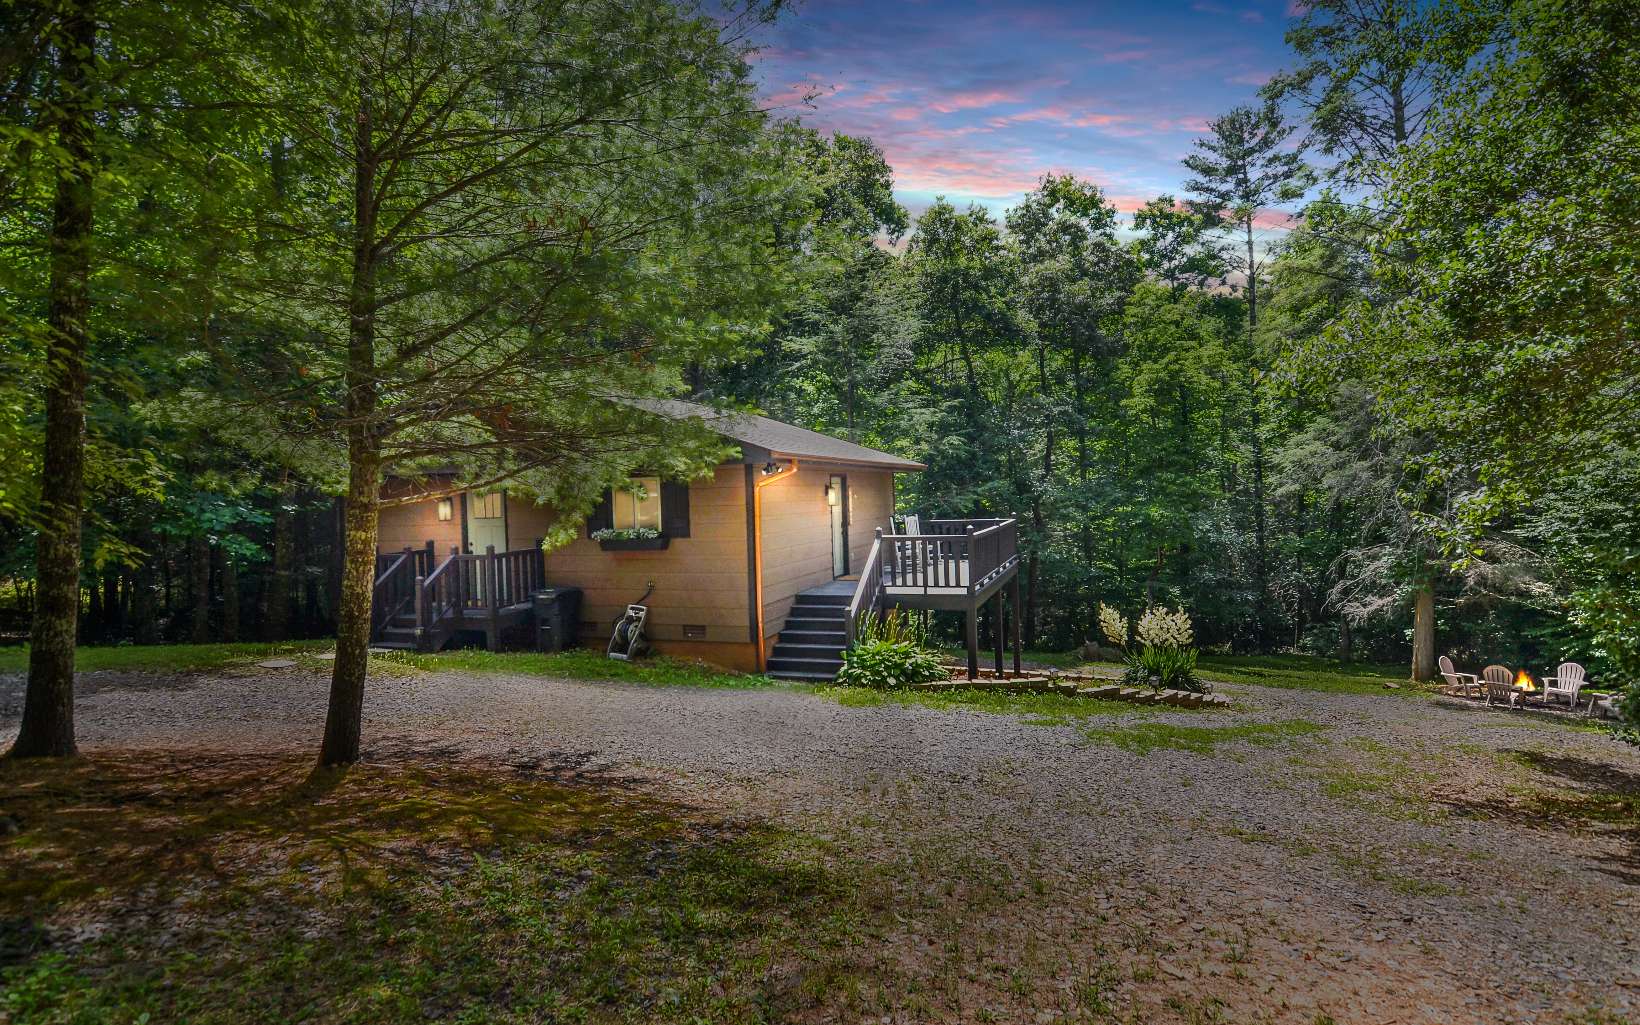 Recently updated TWO UNIT cabin. This investment property is a 4 Bedroom, 2 Bath. Each unit has 2 bedrooms, 1 bathroom, a kitchen and living room. Private deck on upper level. Private porch on lower level. Firepit. Freshly painted inside and outside. New Flooring. New hot tub. Small stream at bottom of the property.